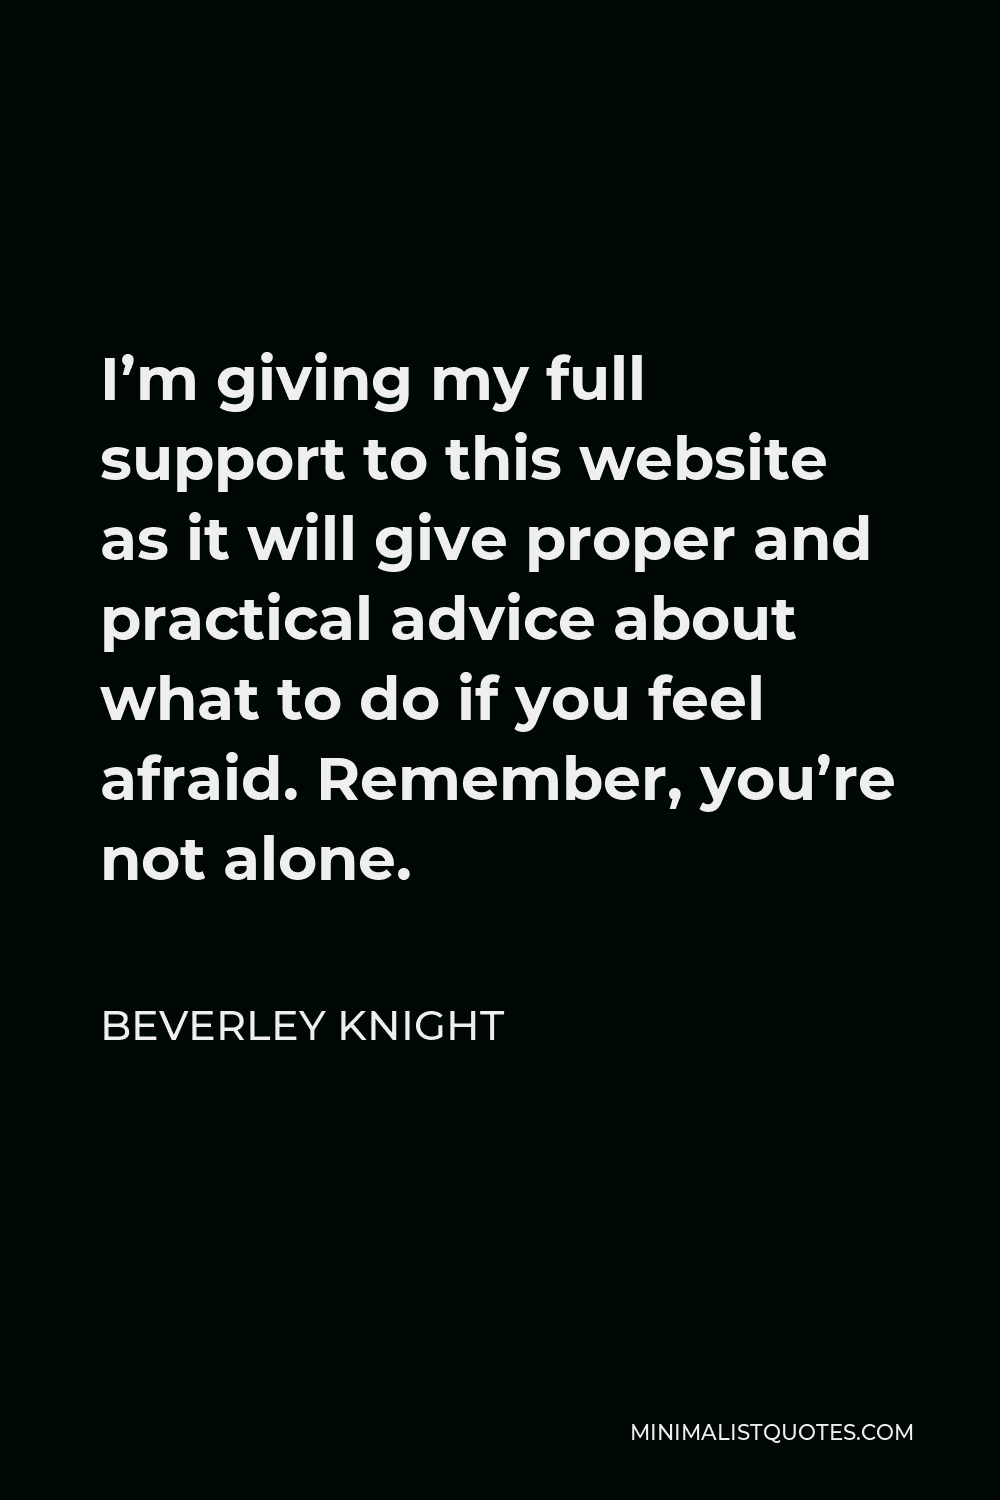 Beverley Knight Quote - I’m giving my full support to this website as it will give proper and practical advice about what to do if you feel afraid. Remember, you’re not alone.